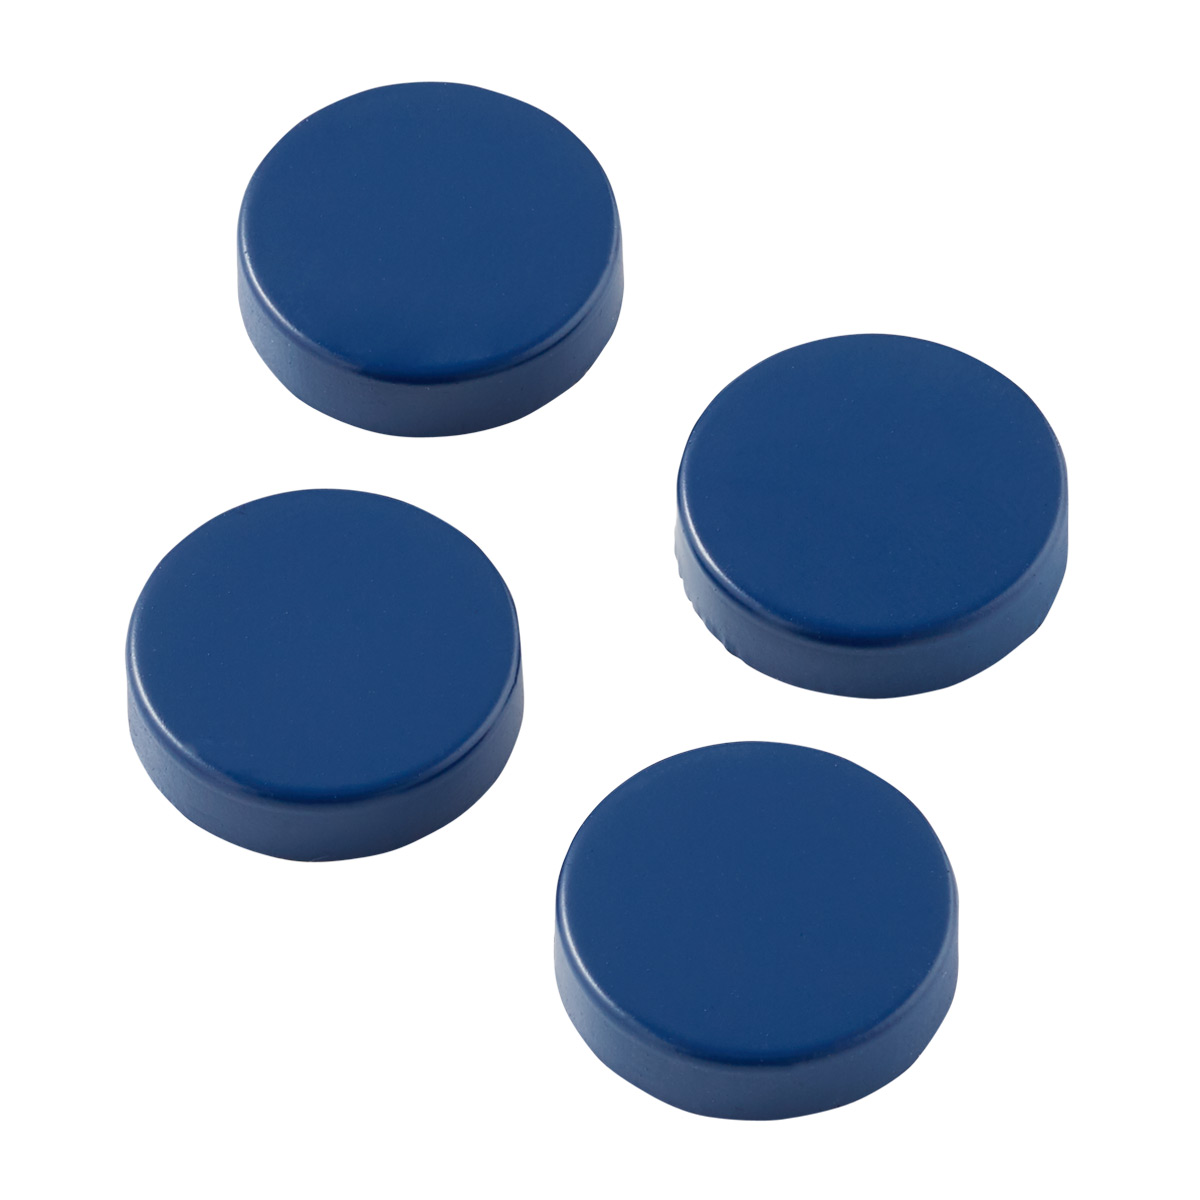 https://www.containerstore.com/catalogimages/354167/10076399-Snap!-strong-magnets-navy.jpg